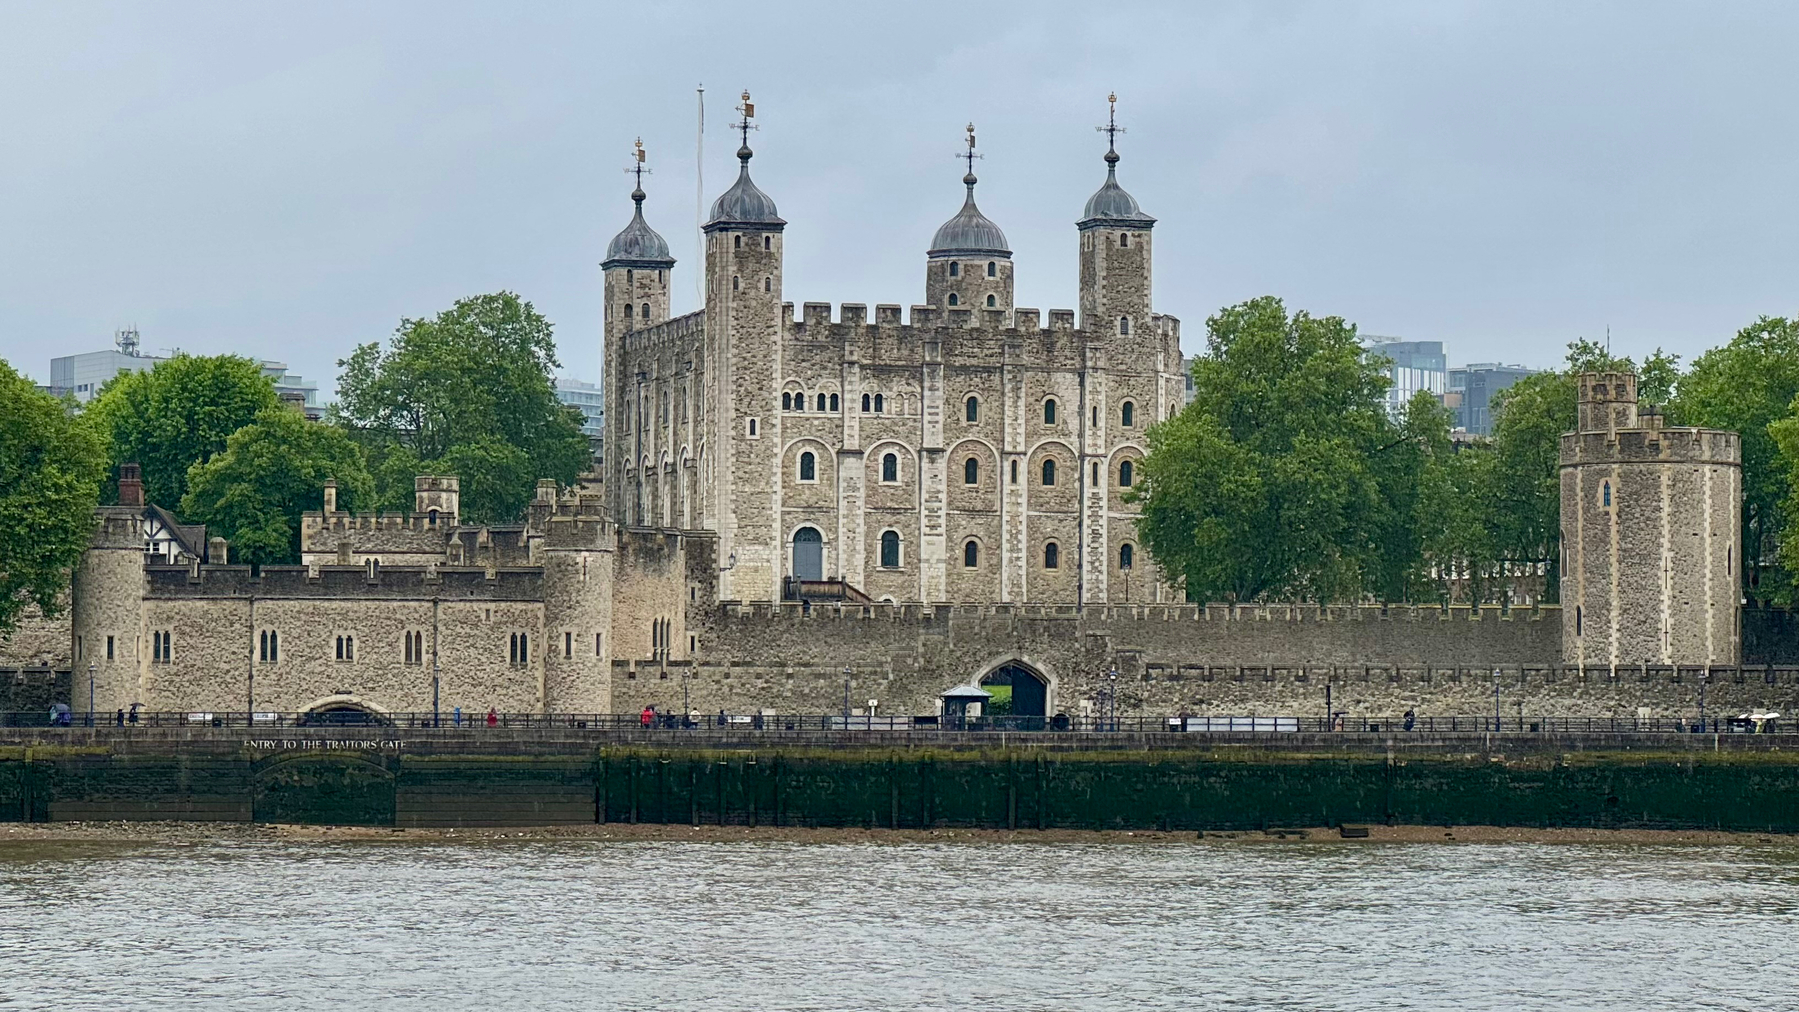 The Tower of London, a historic castle on the north bank of the River Thames in central London, with its distinctive white buildings and four turreted towers.